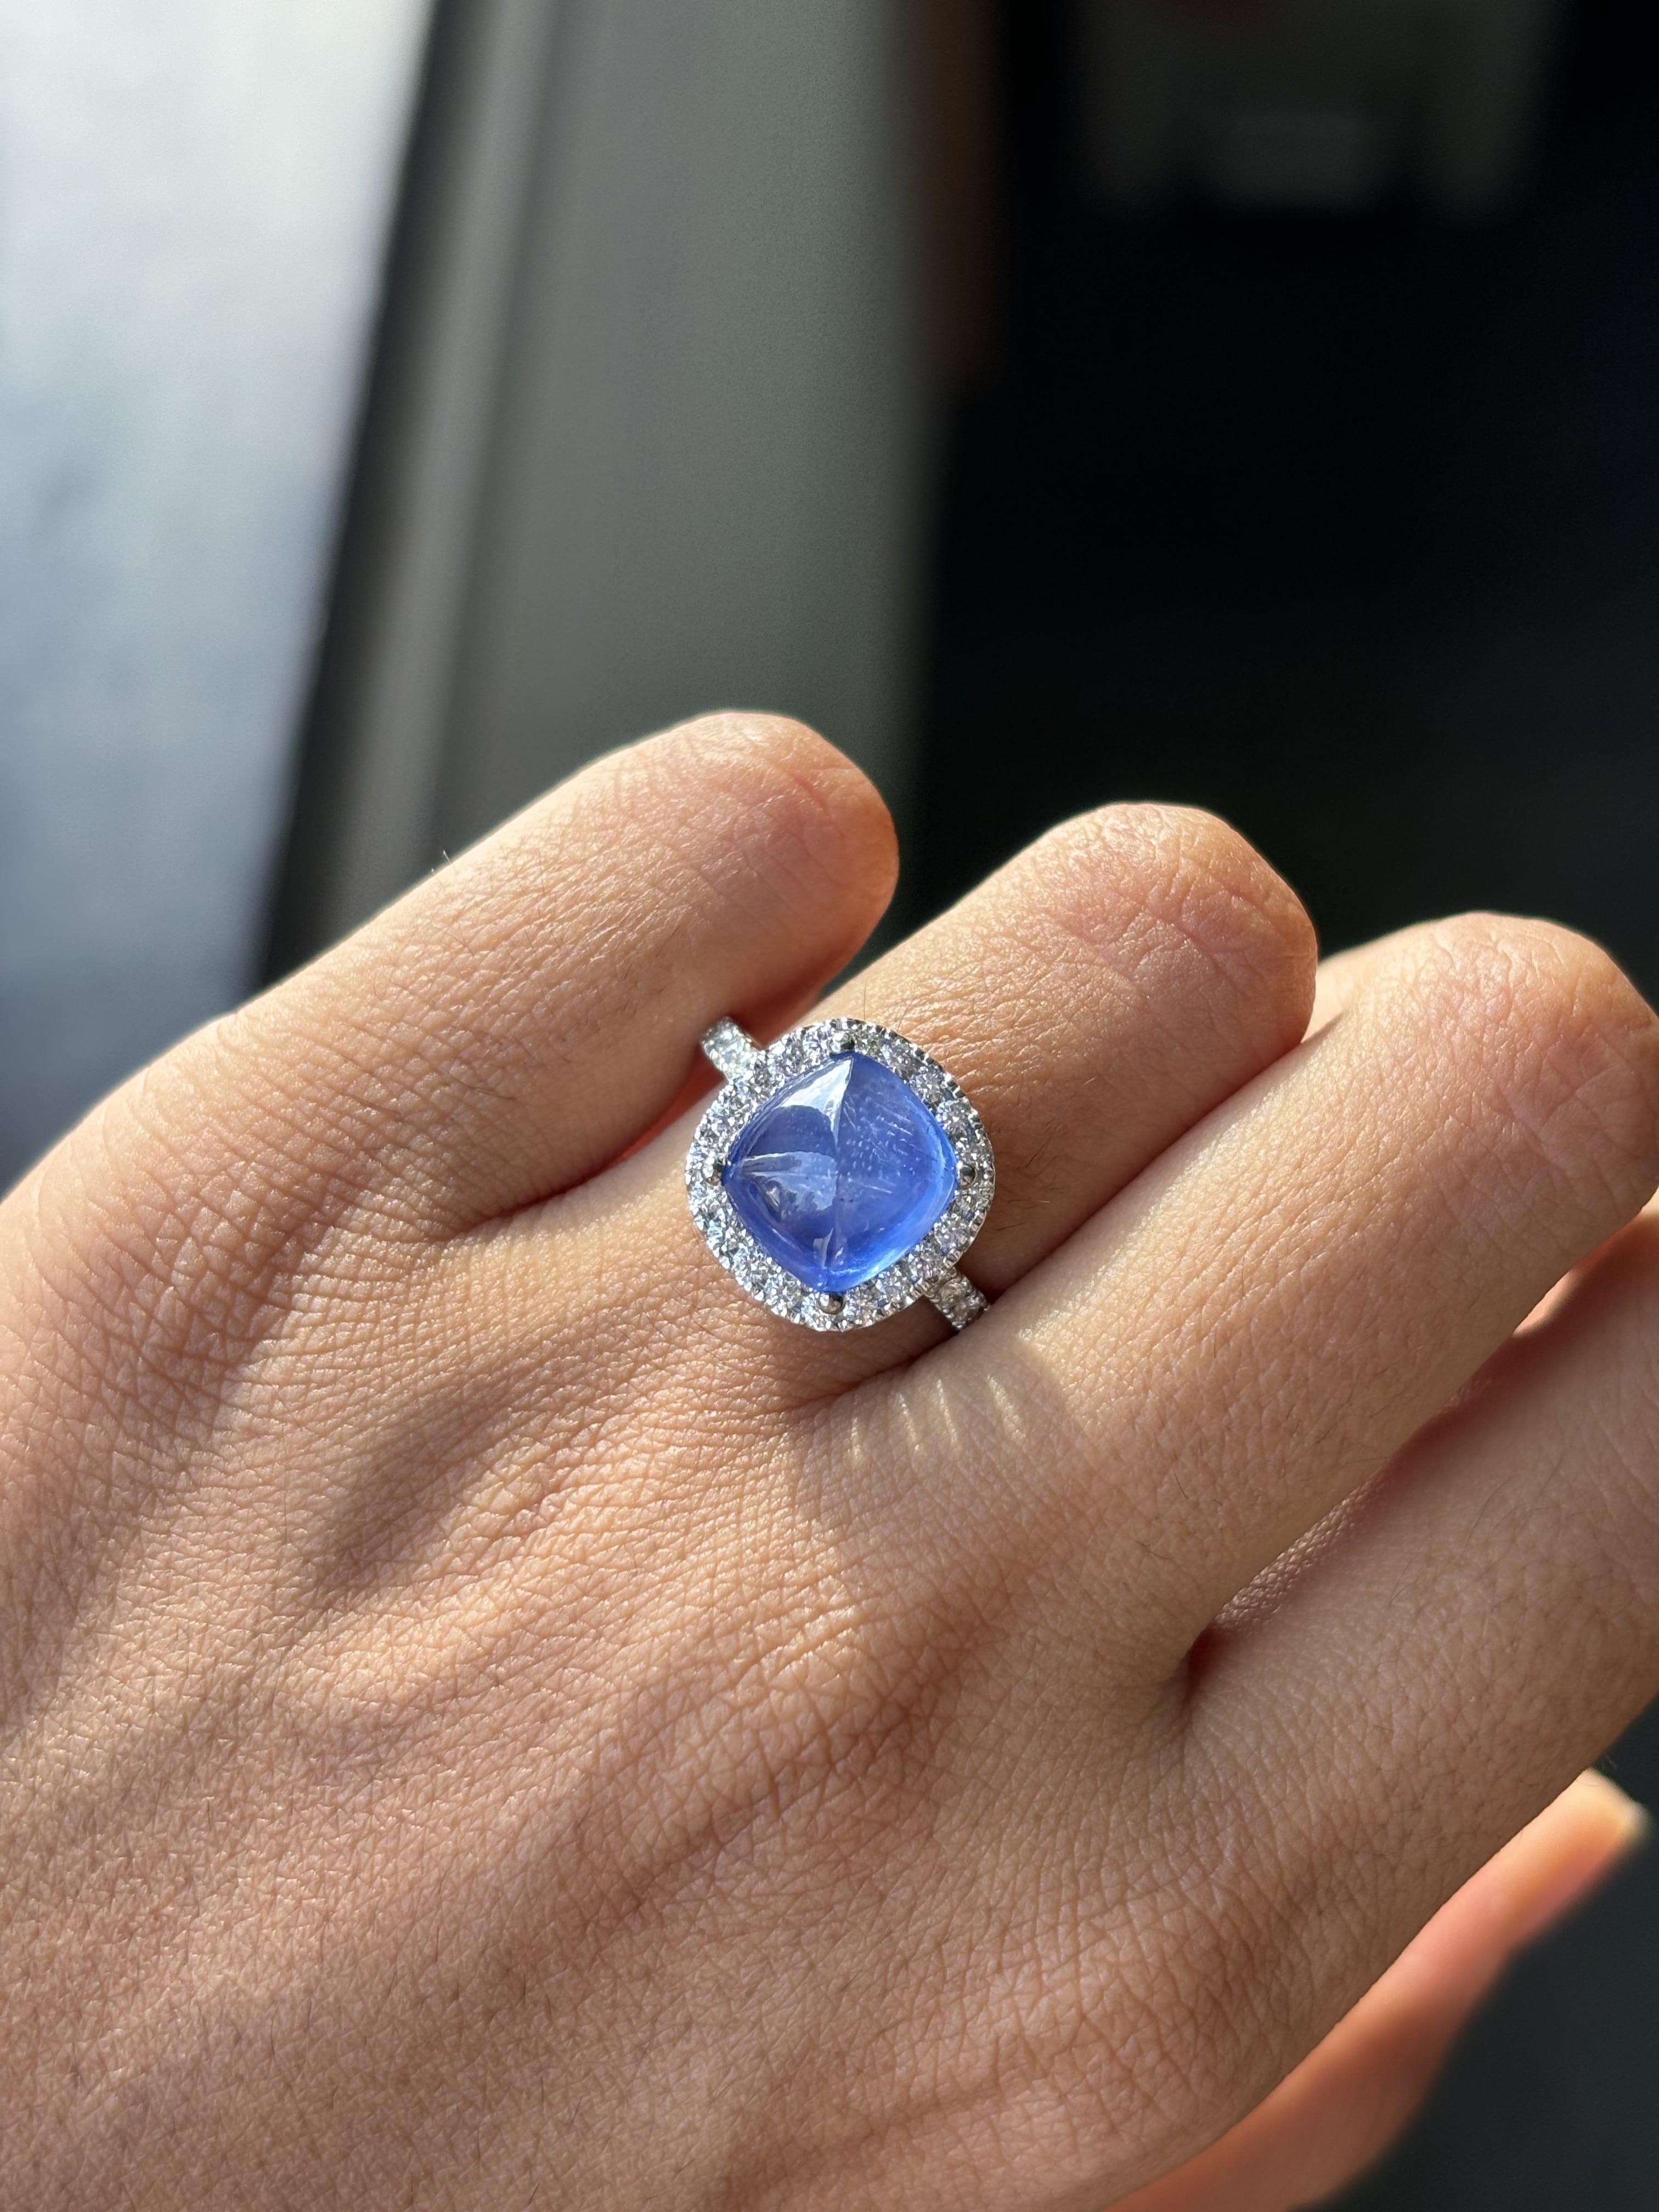 4.23 Carat Sugarloaf Ceylon Sapphire Ring with Halo Diamonds in 14K White Gold For Sale 5